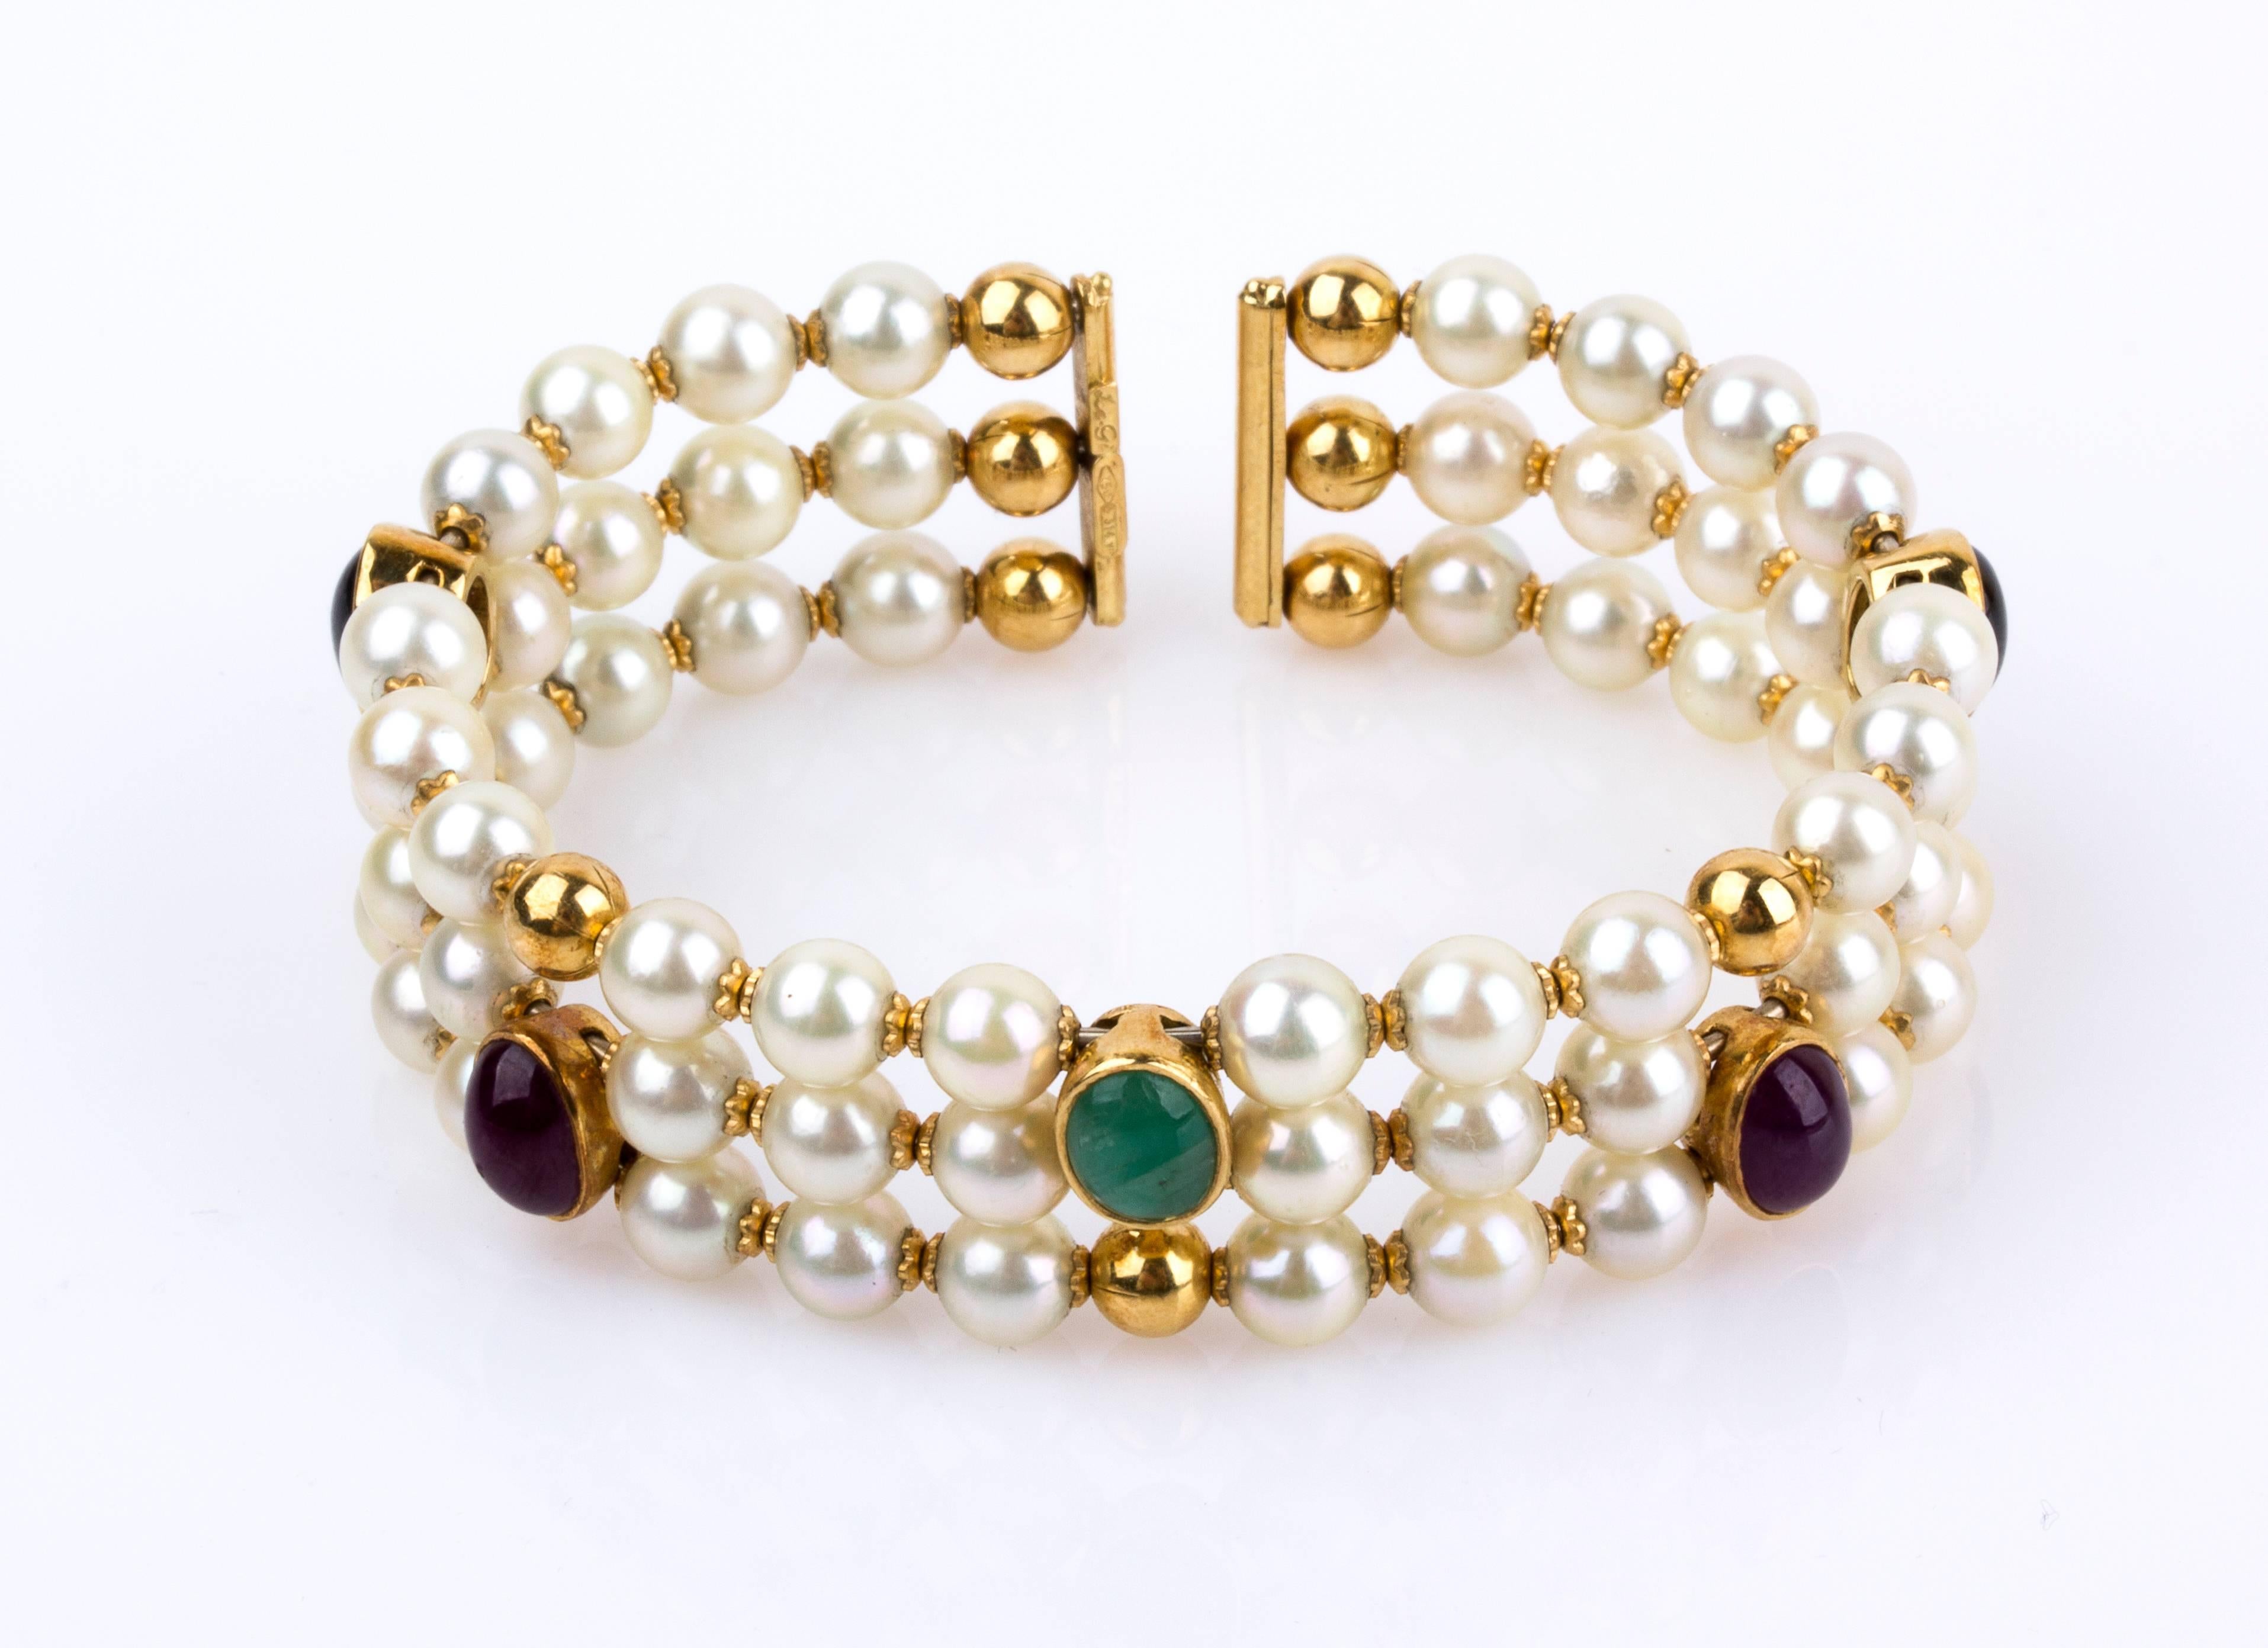 Cuff - bracelet three rows of cultured pearls, set sapphires, rubies and emeralds intervallated by jellow gold boulles. Pearl diameter 5.5/6 mm. Diameter 52 mm. Weight 33.6 gr. Italian assay mark 750 and marker's marks. Item condition grading: ****